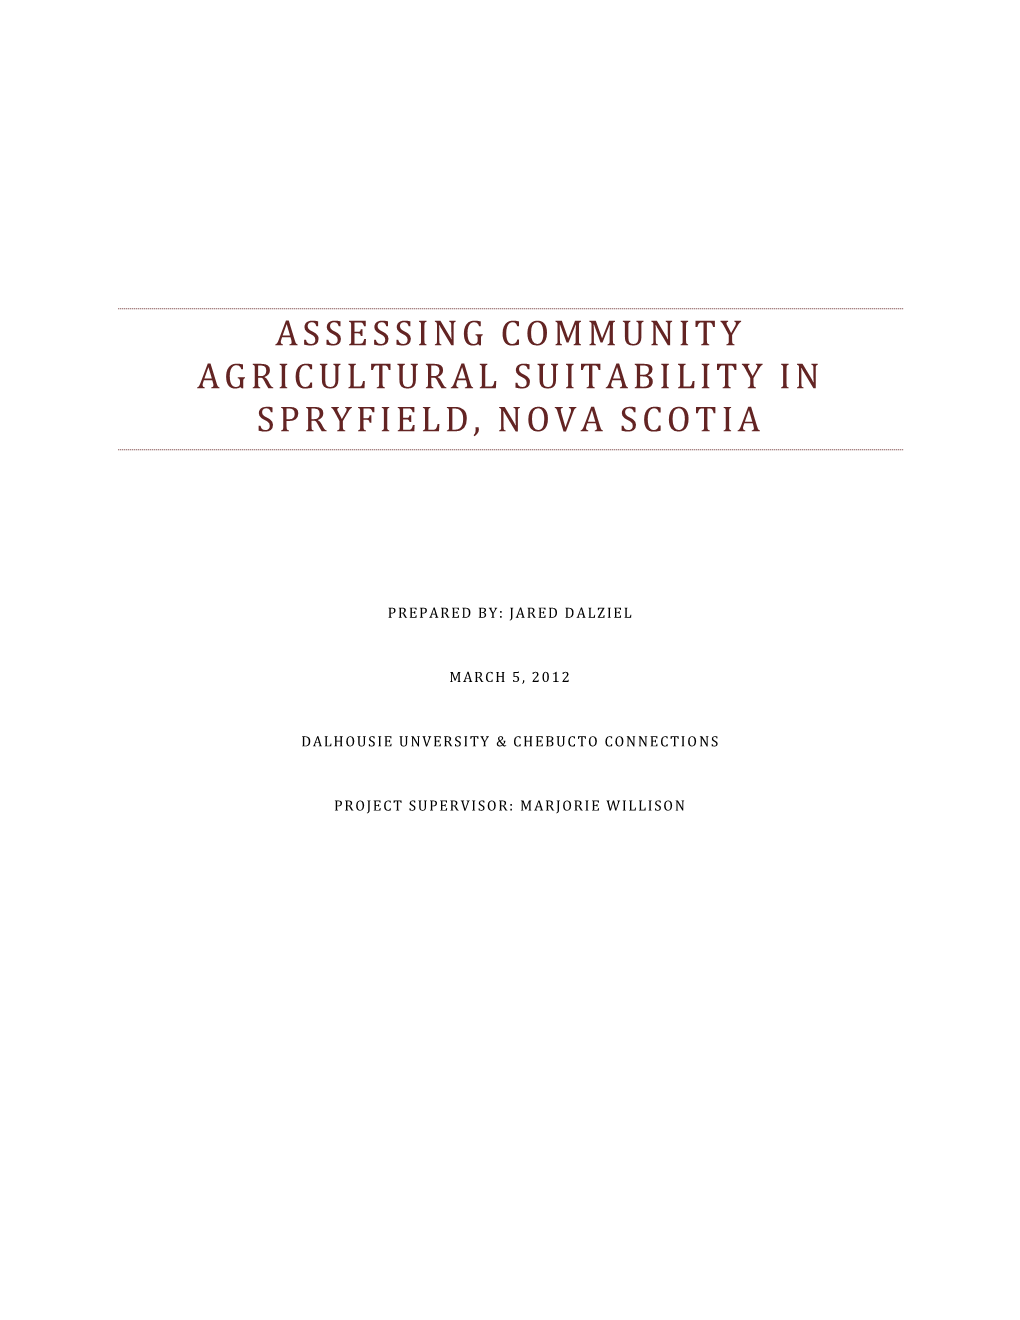 Assessing Agricultural Suitability in Spryfield, NS